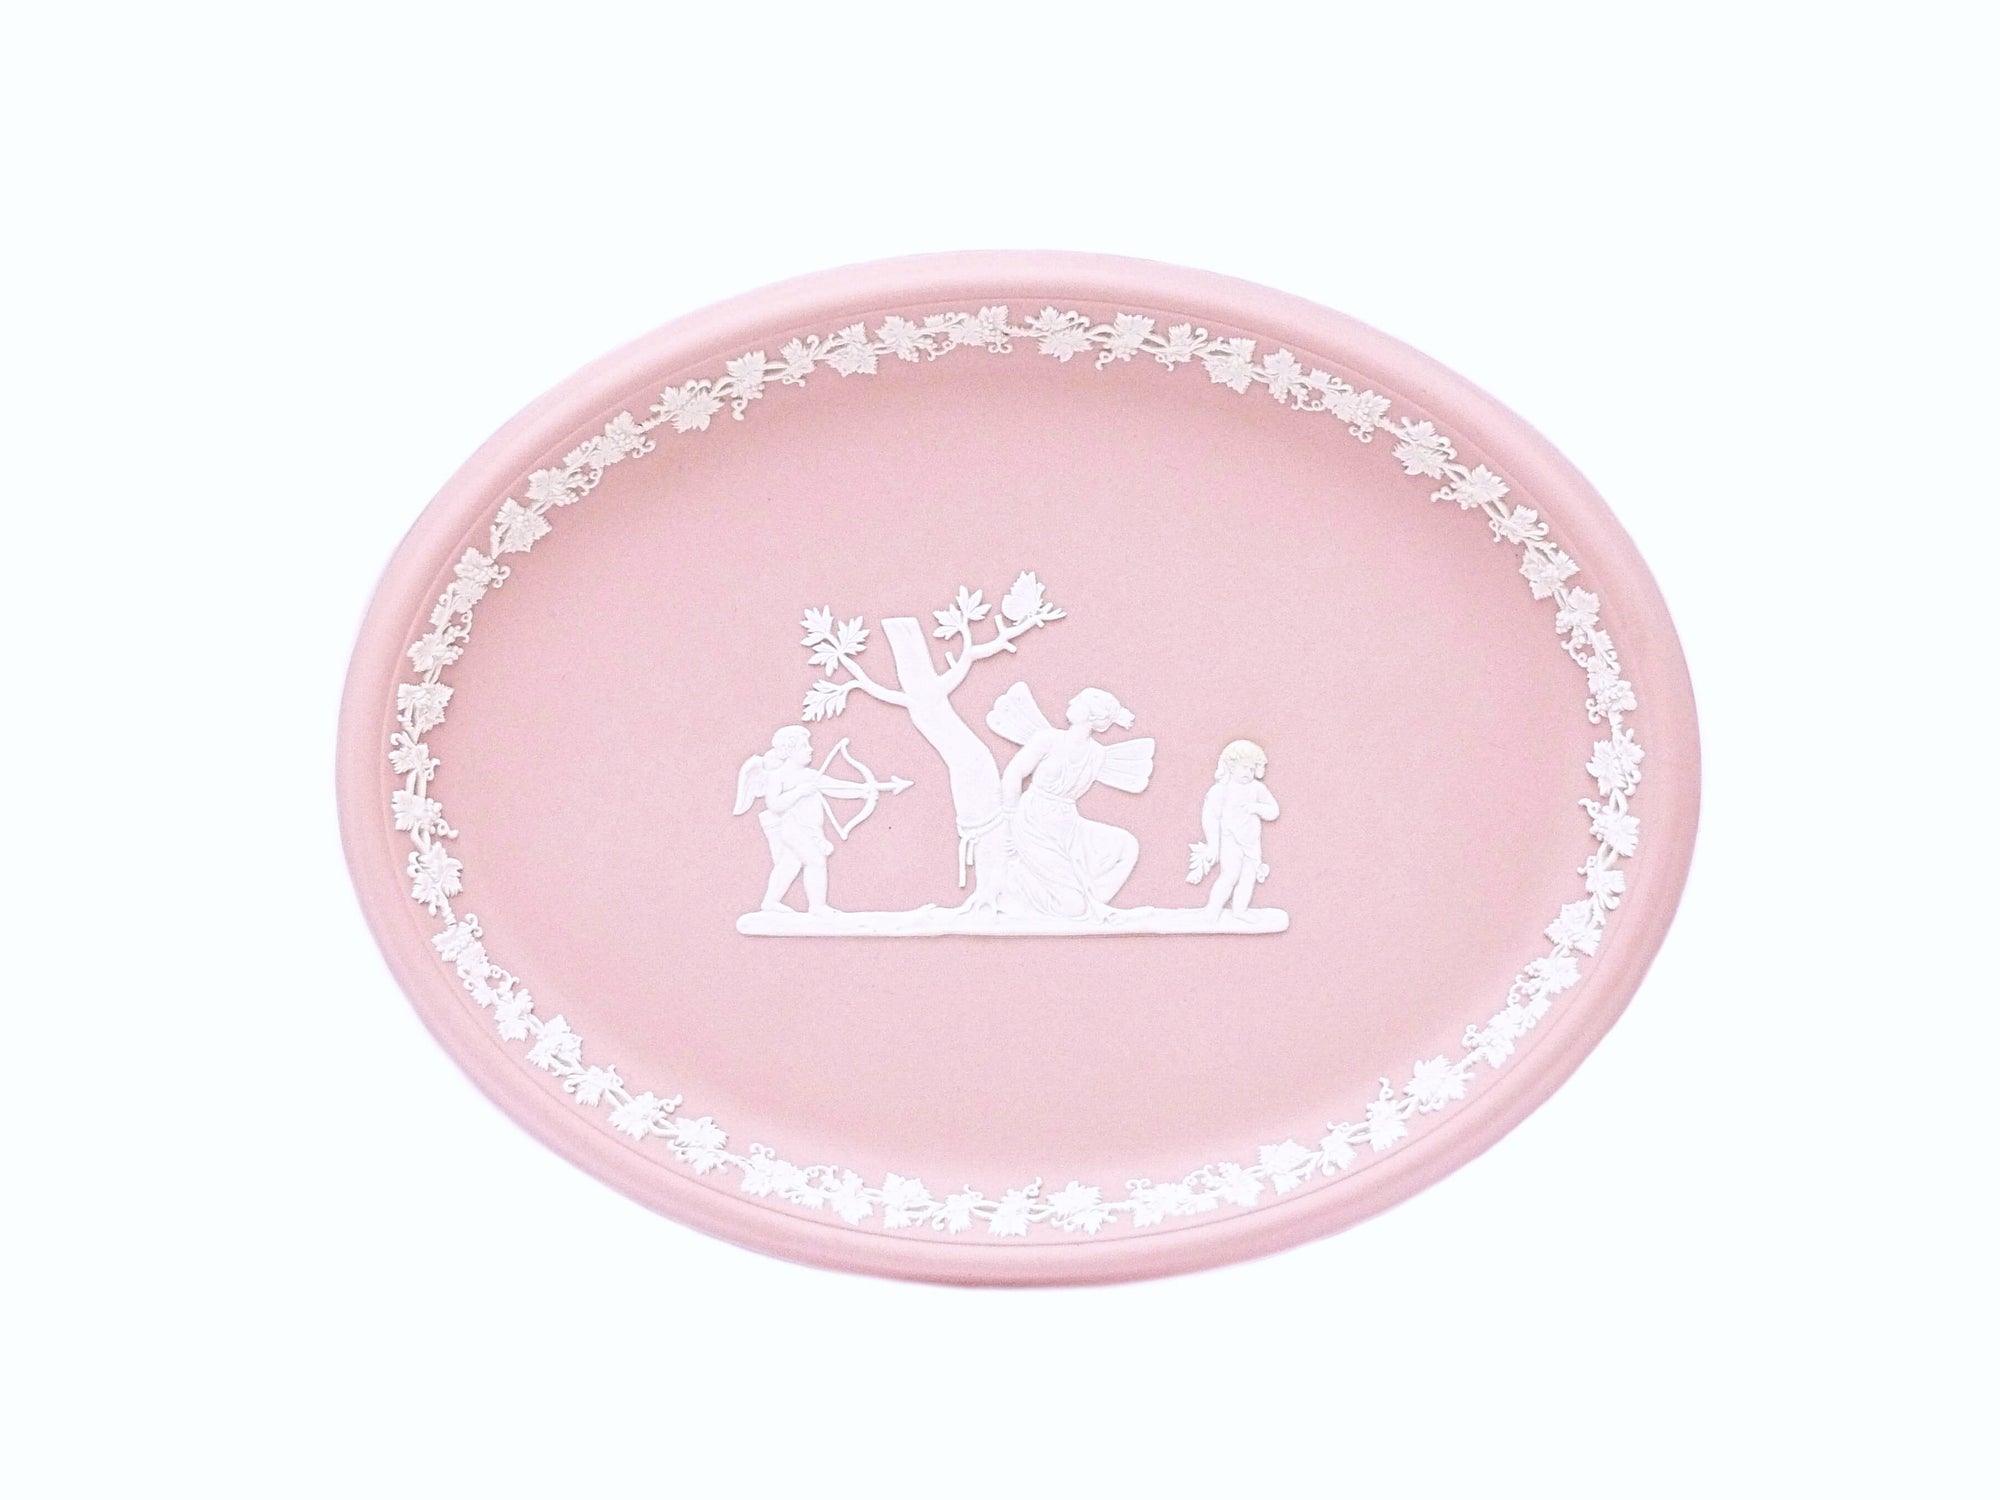 Vintage Pink Wedgwood Jasperware Oval Tray, Exquisite Colour